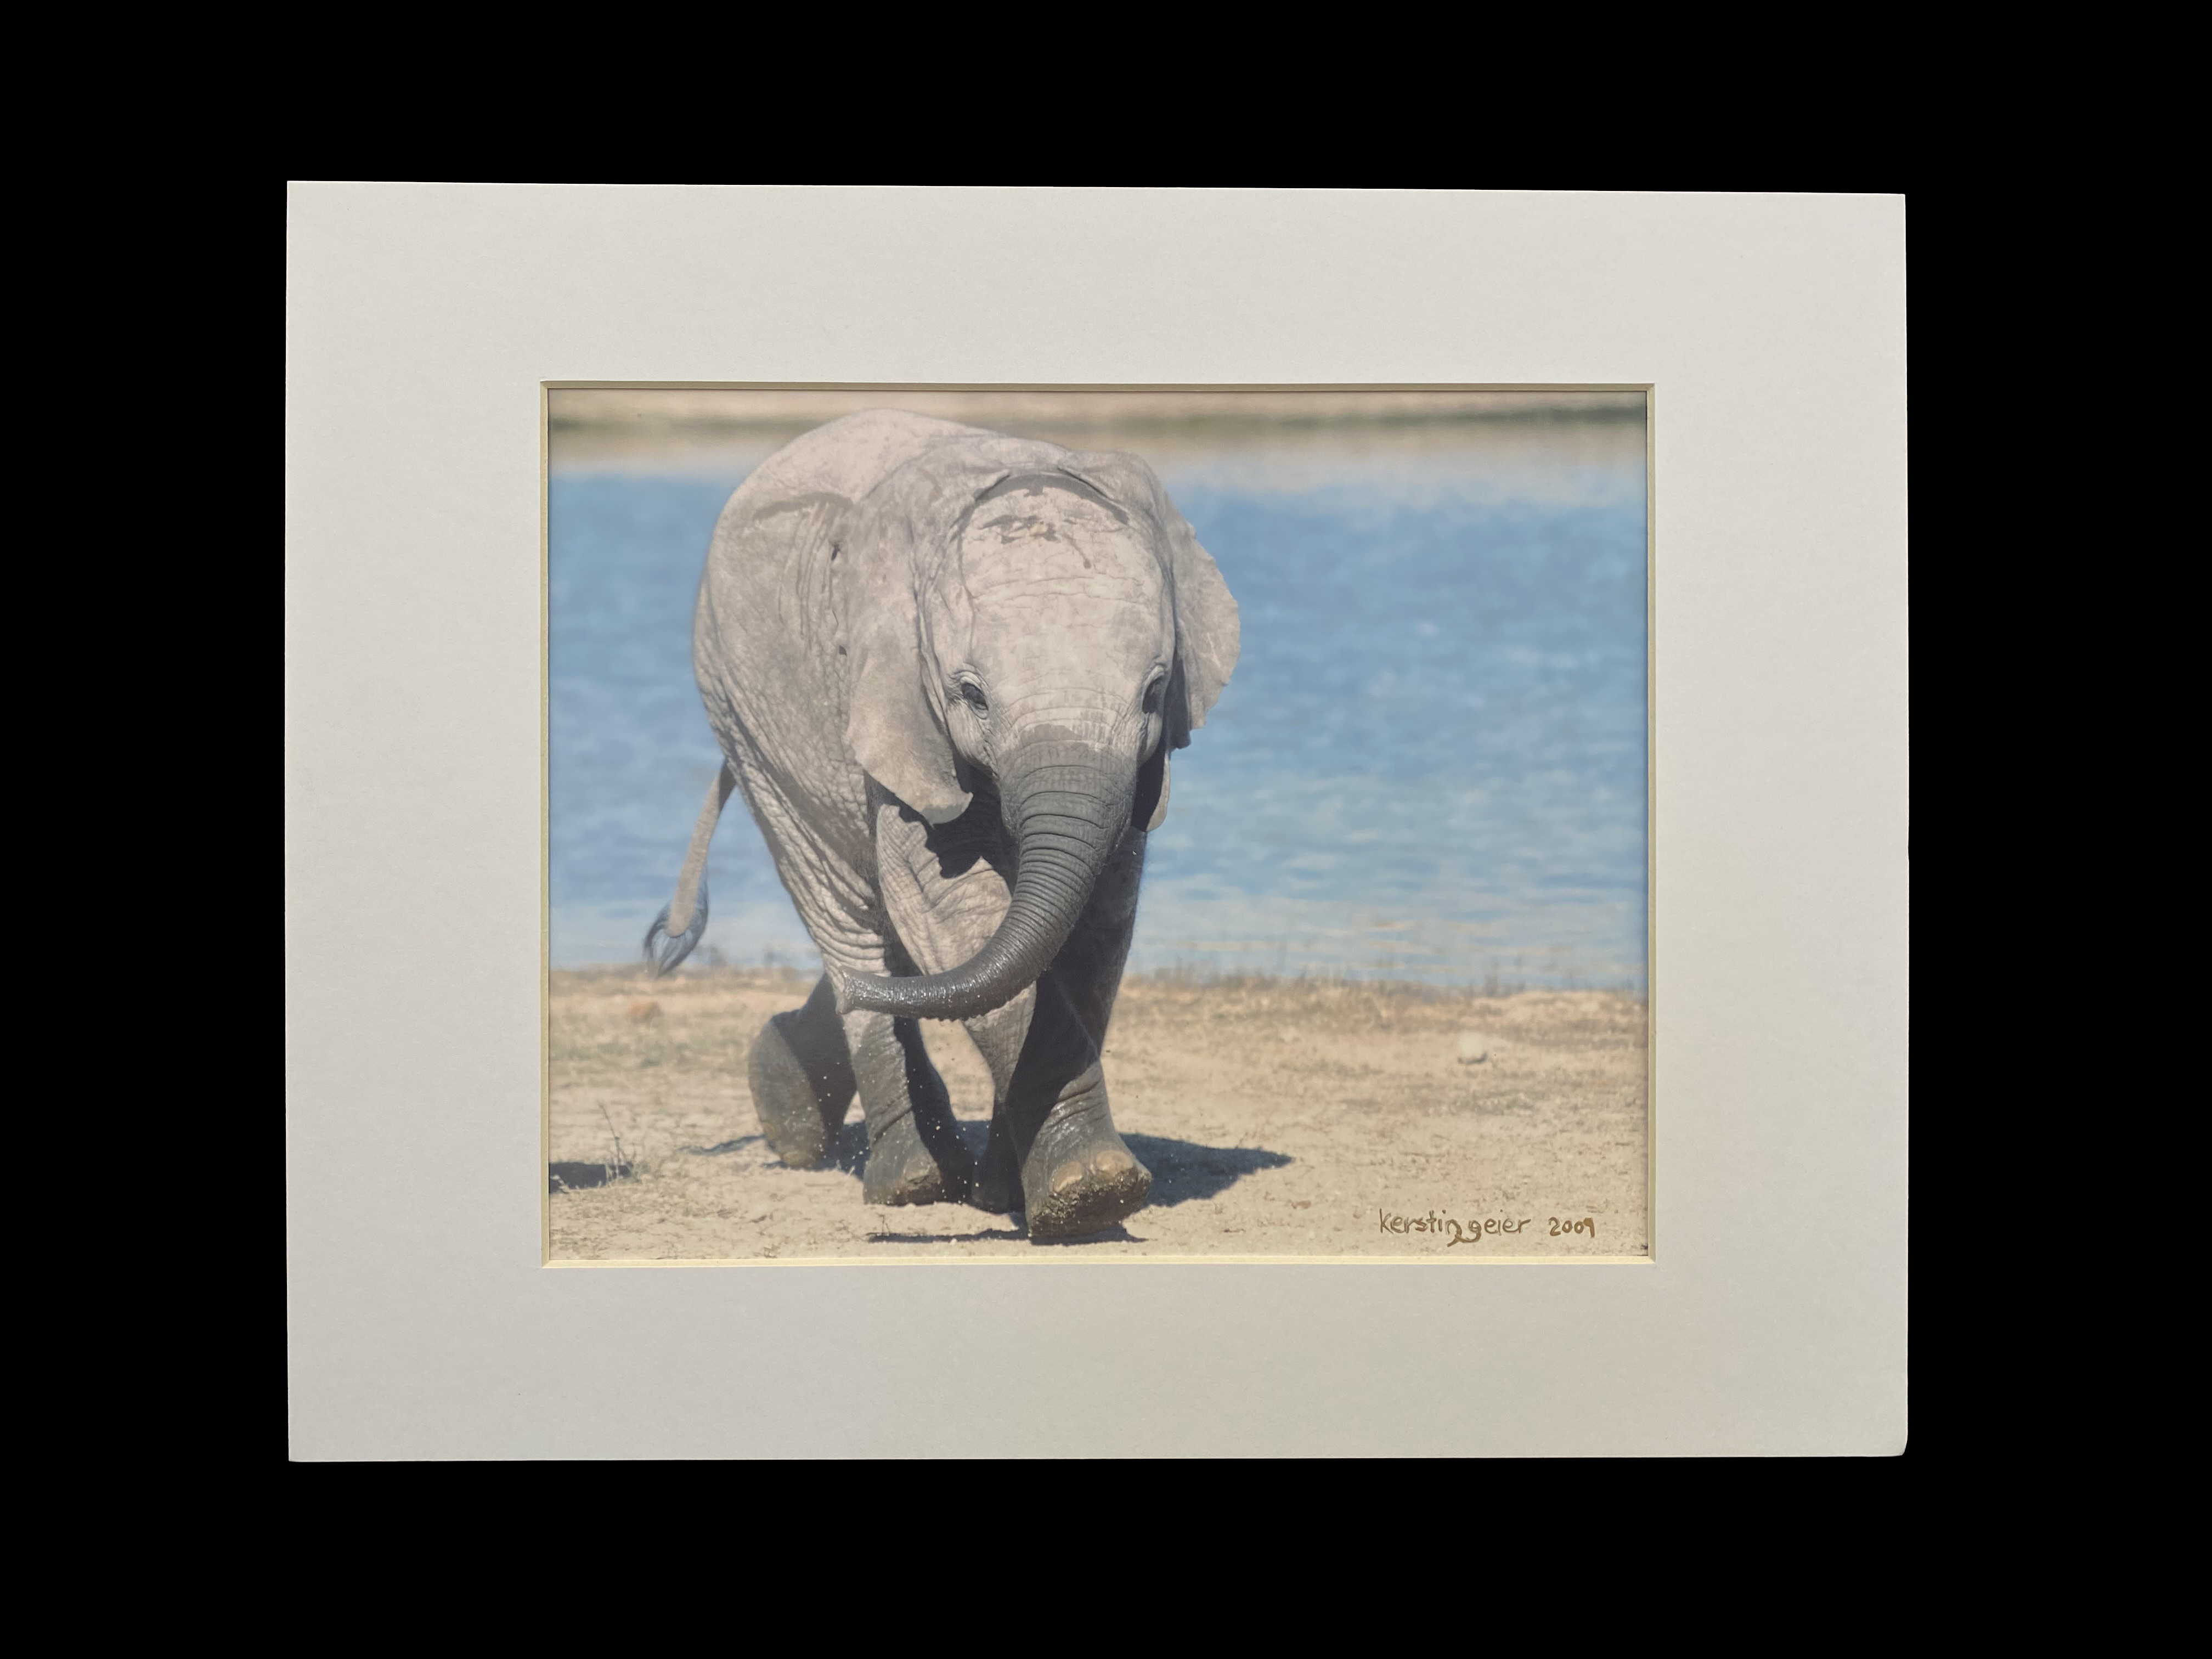 Photograph by Kerstin Geier entitled  Young Elephant,Kruger Park, South Africa 